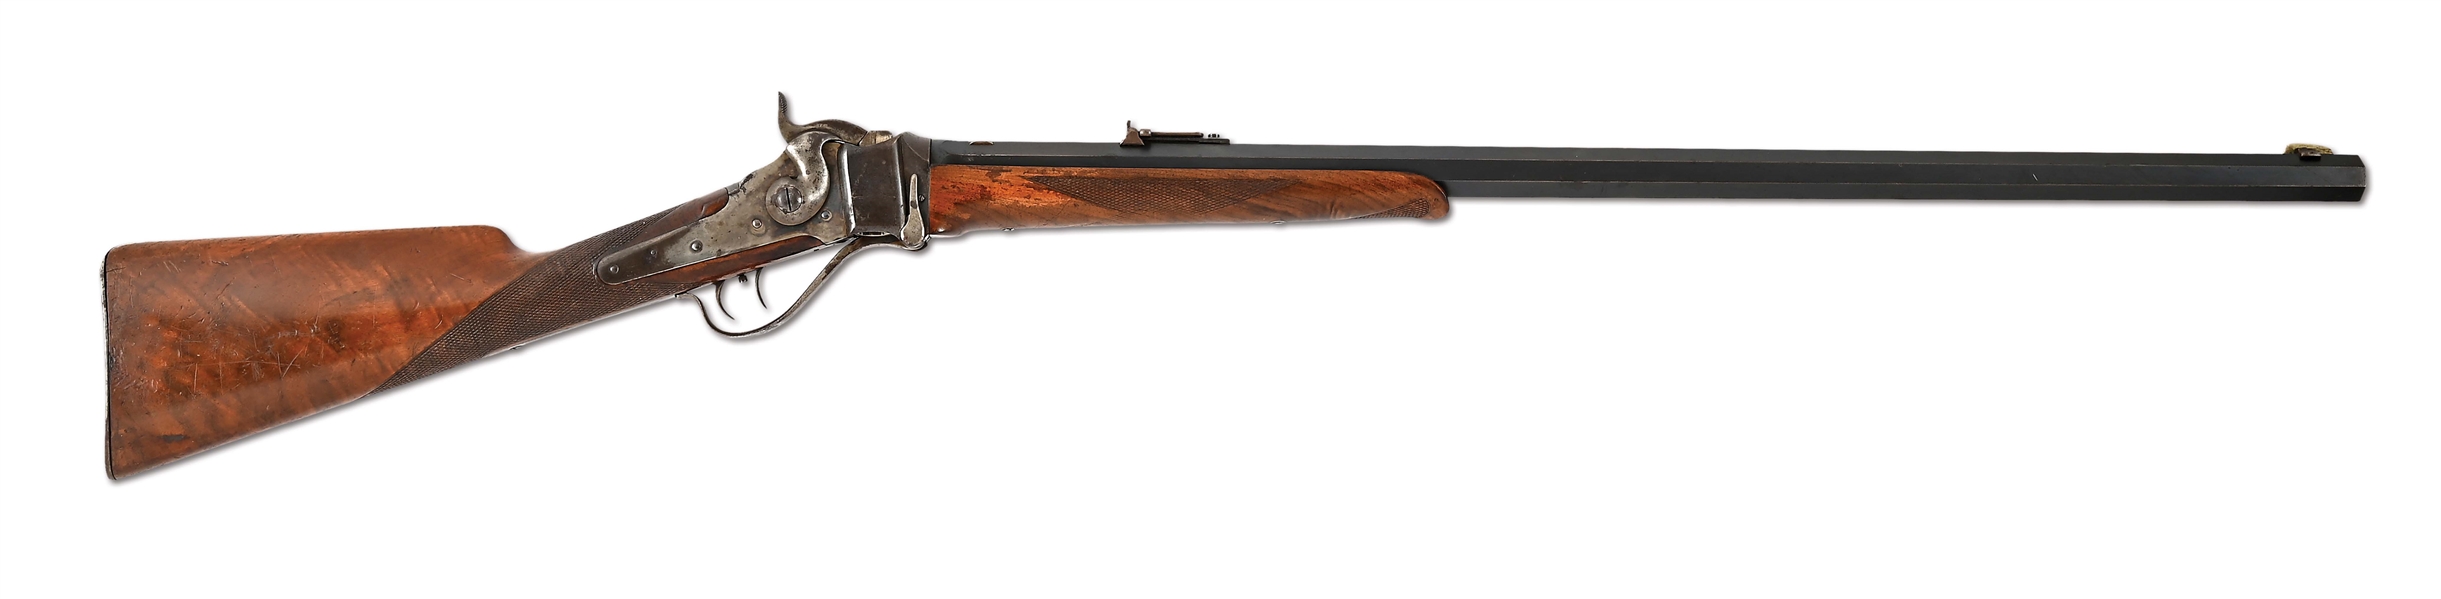 (A) DOCUMENTED SHARPS "OLD RELIABLE" MODEL 1874 OLD RELIABLE RIFLE WITH KELLOGG INSCRIPTION.